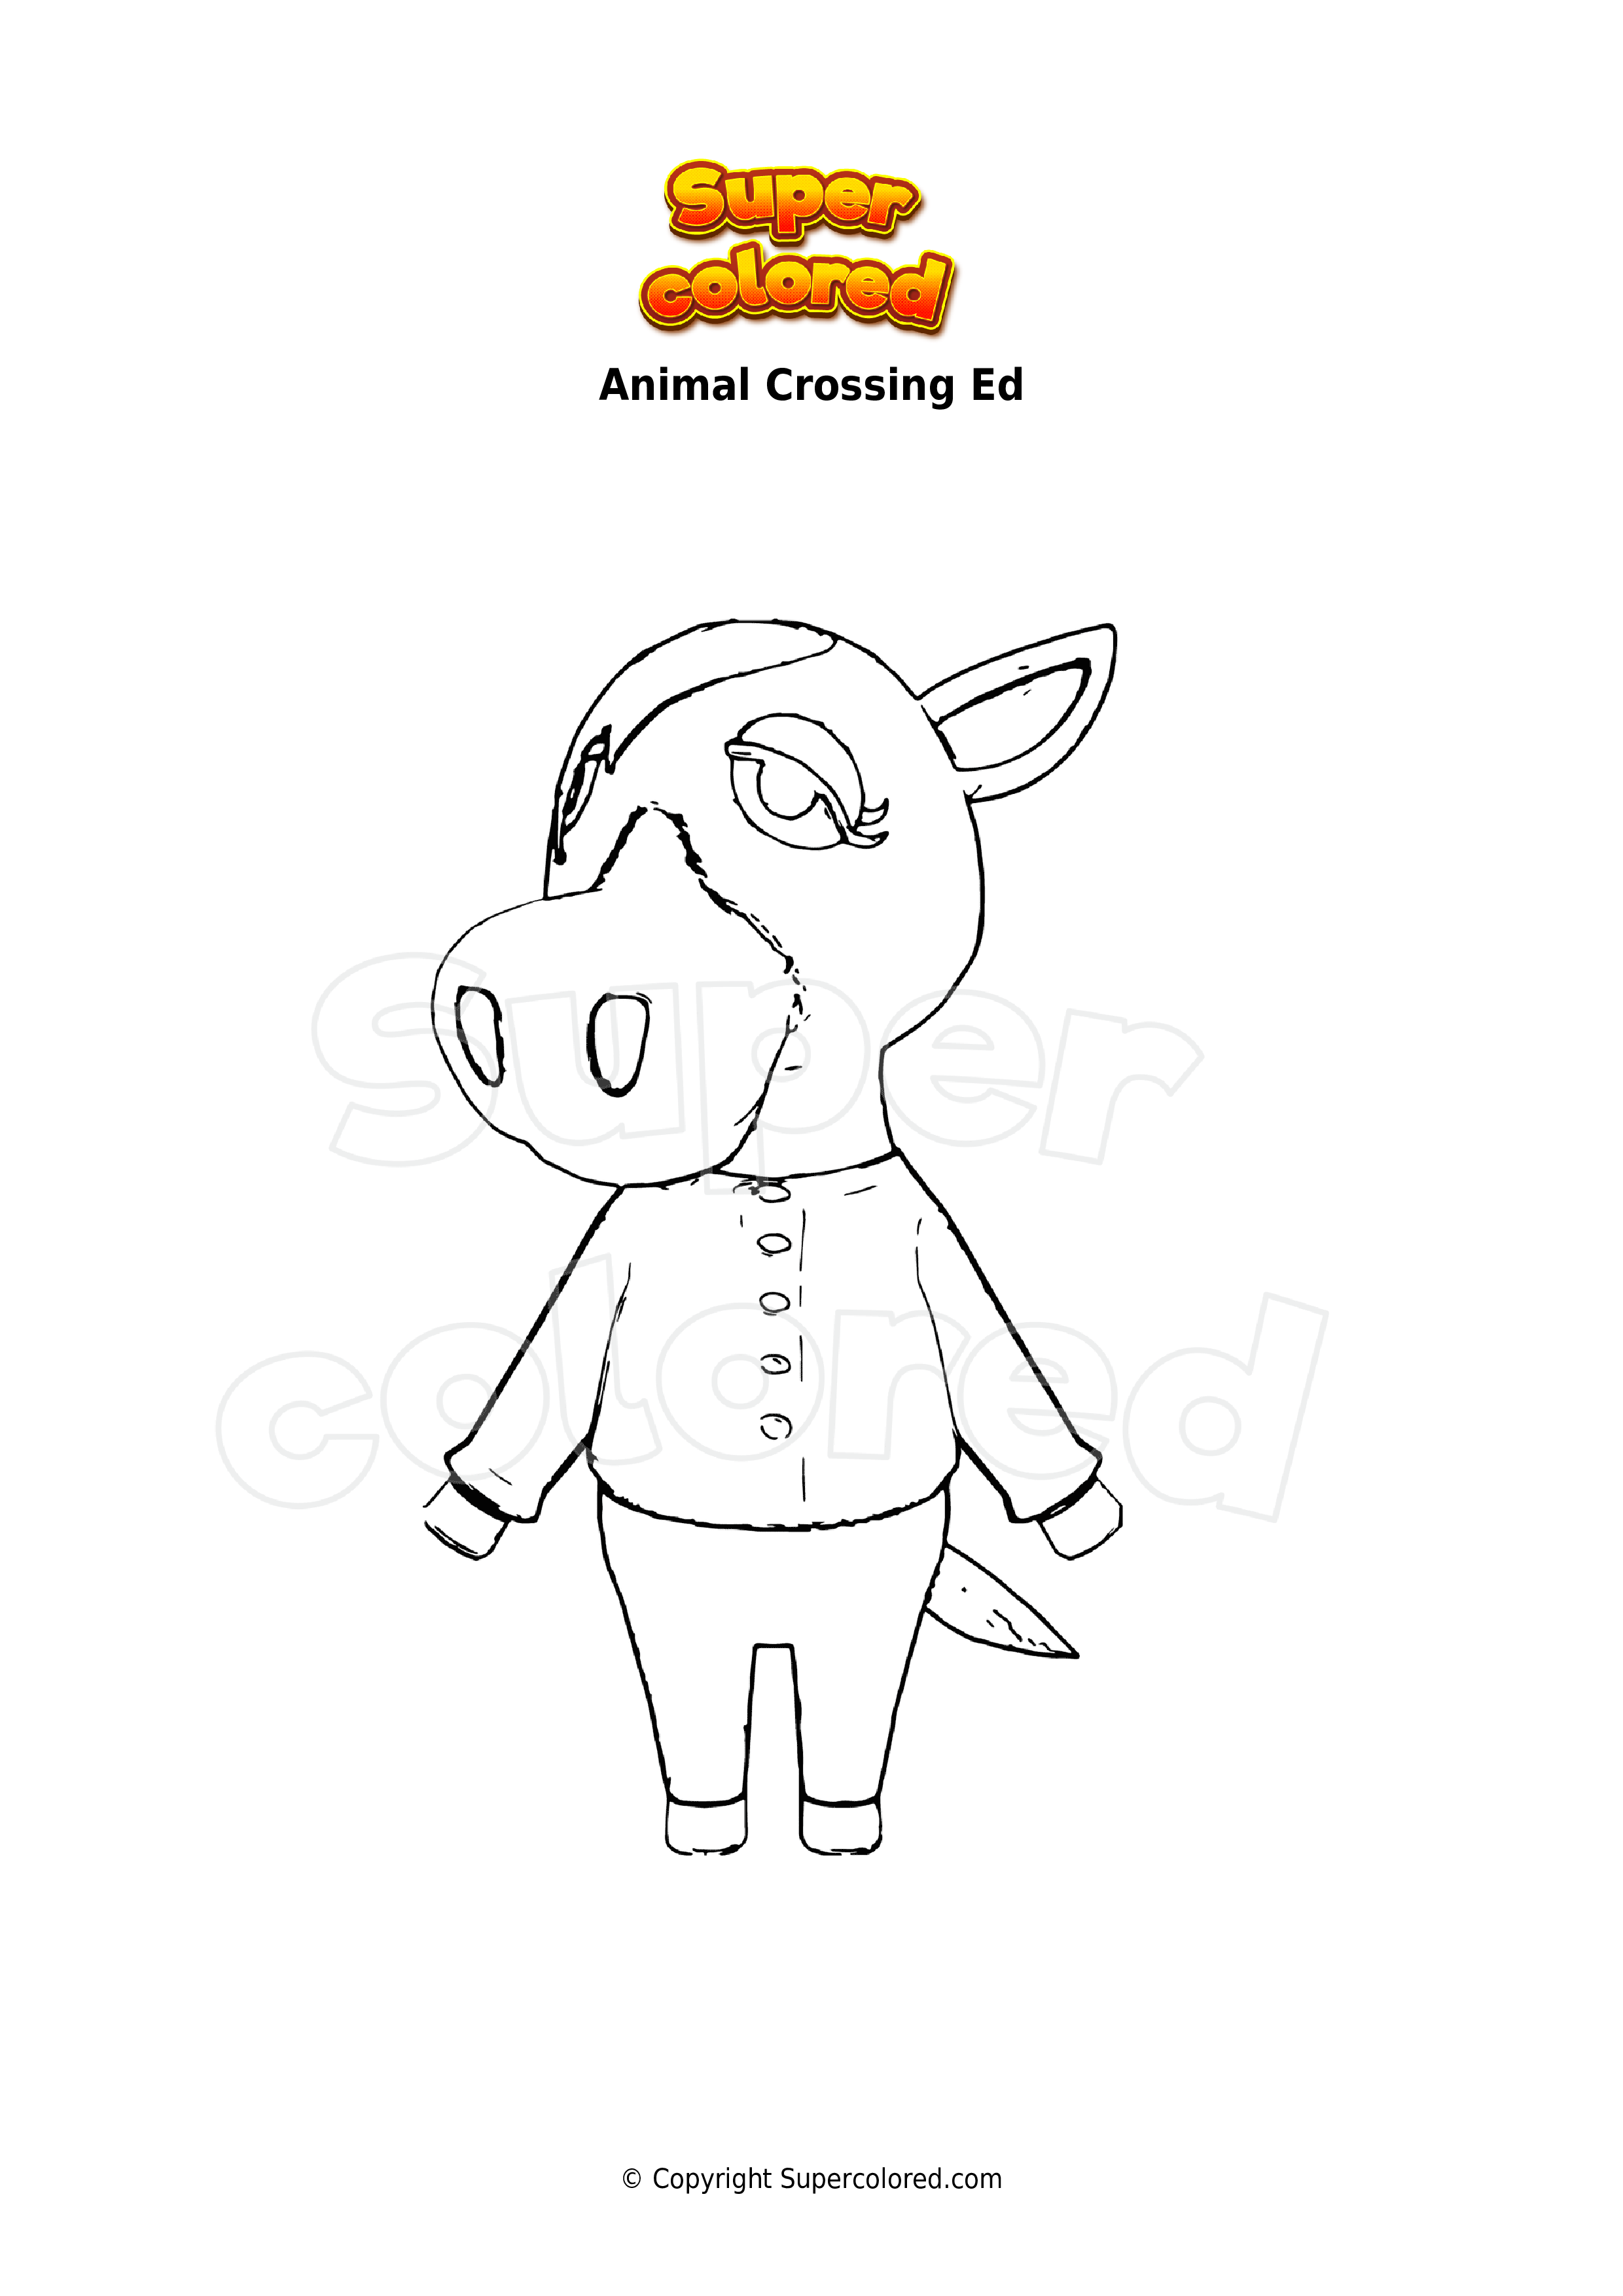 Coloring page Animal Crossing Ed 